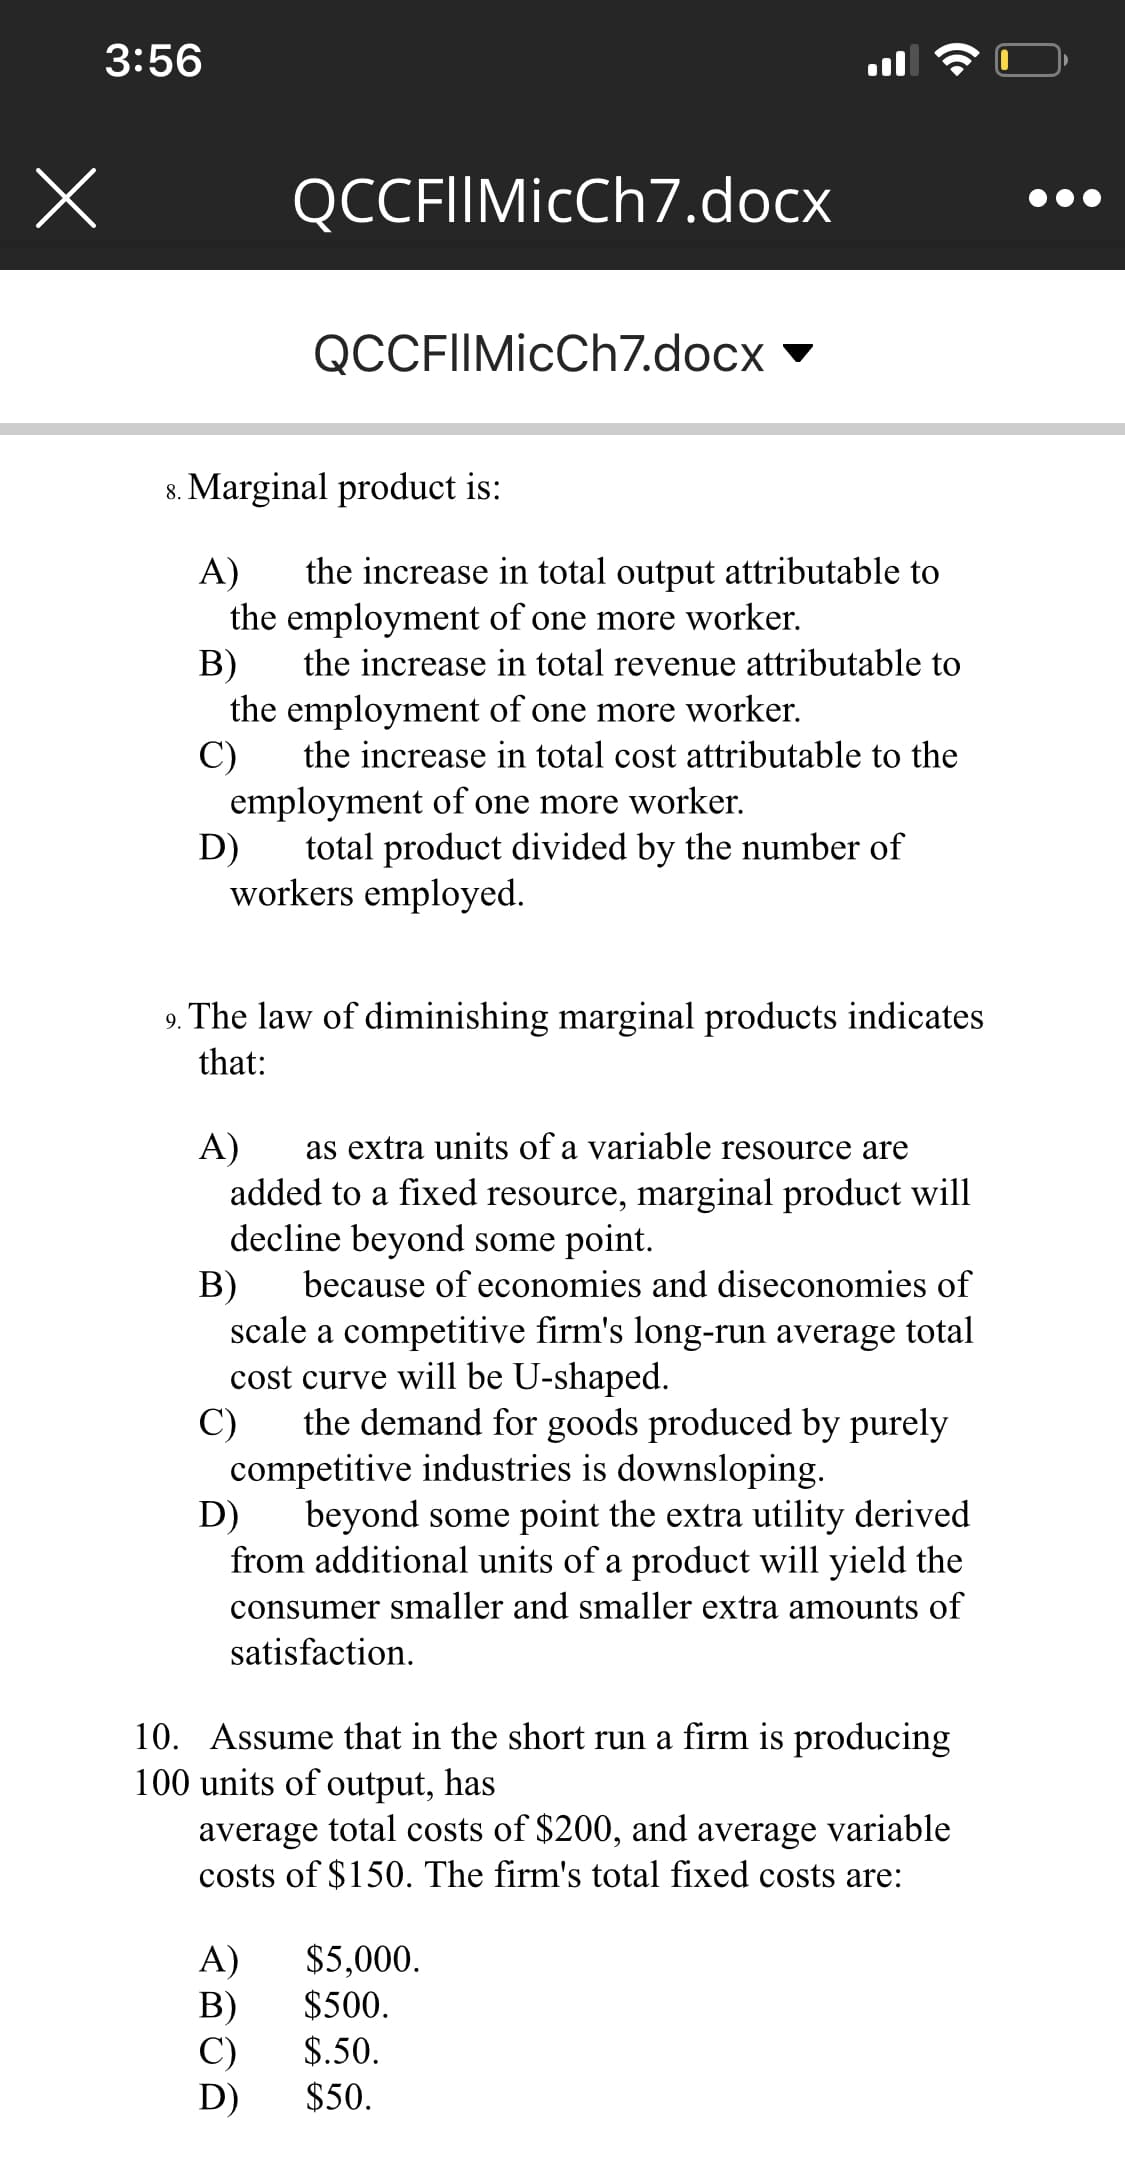 3:56
QCCFIIMicCh7.docx
QCCFIIMicCh7.docx
8. Marginal product is:
the increase in total output attributable to
A)
the employment of one more worker.
B)
the employment of one more worker.
C)
employment of one more worker.
D)
the increase in total revenue attributable to
the increase in total cost attributable to the
total product divided by the number of
workers employed.
9. The law of diminishing marginal products indicates
that:
as extra units of a variable resource are
A)
added to a fixed resource, marginal product will
decline beyond some point.
because of economies and diseconomies of
B)
scale a competitive firm's long-run average total
cost curve will be U-shaped.
the demand for goods produced by purcly
C)
competitive industries is downsloping.
beyond some point the extra utility derived
D)
from additional units of a product will yield the
consumer smaller and smaller extra amounts of
satisfaction.
10. Assume that in the short run a firm is producing
100 units of output, has
average total costs of $200, and average variable
costs of $150. The firm's total fixed costs are:
A)
B)
C)
D)
$5,000.
$500.
$.50.
$50.
(•
